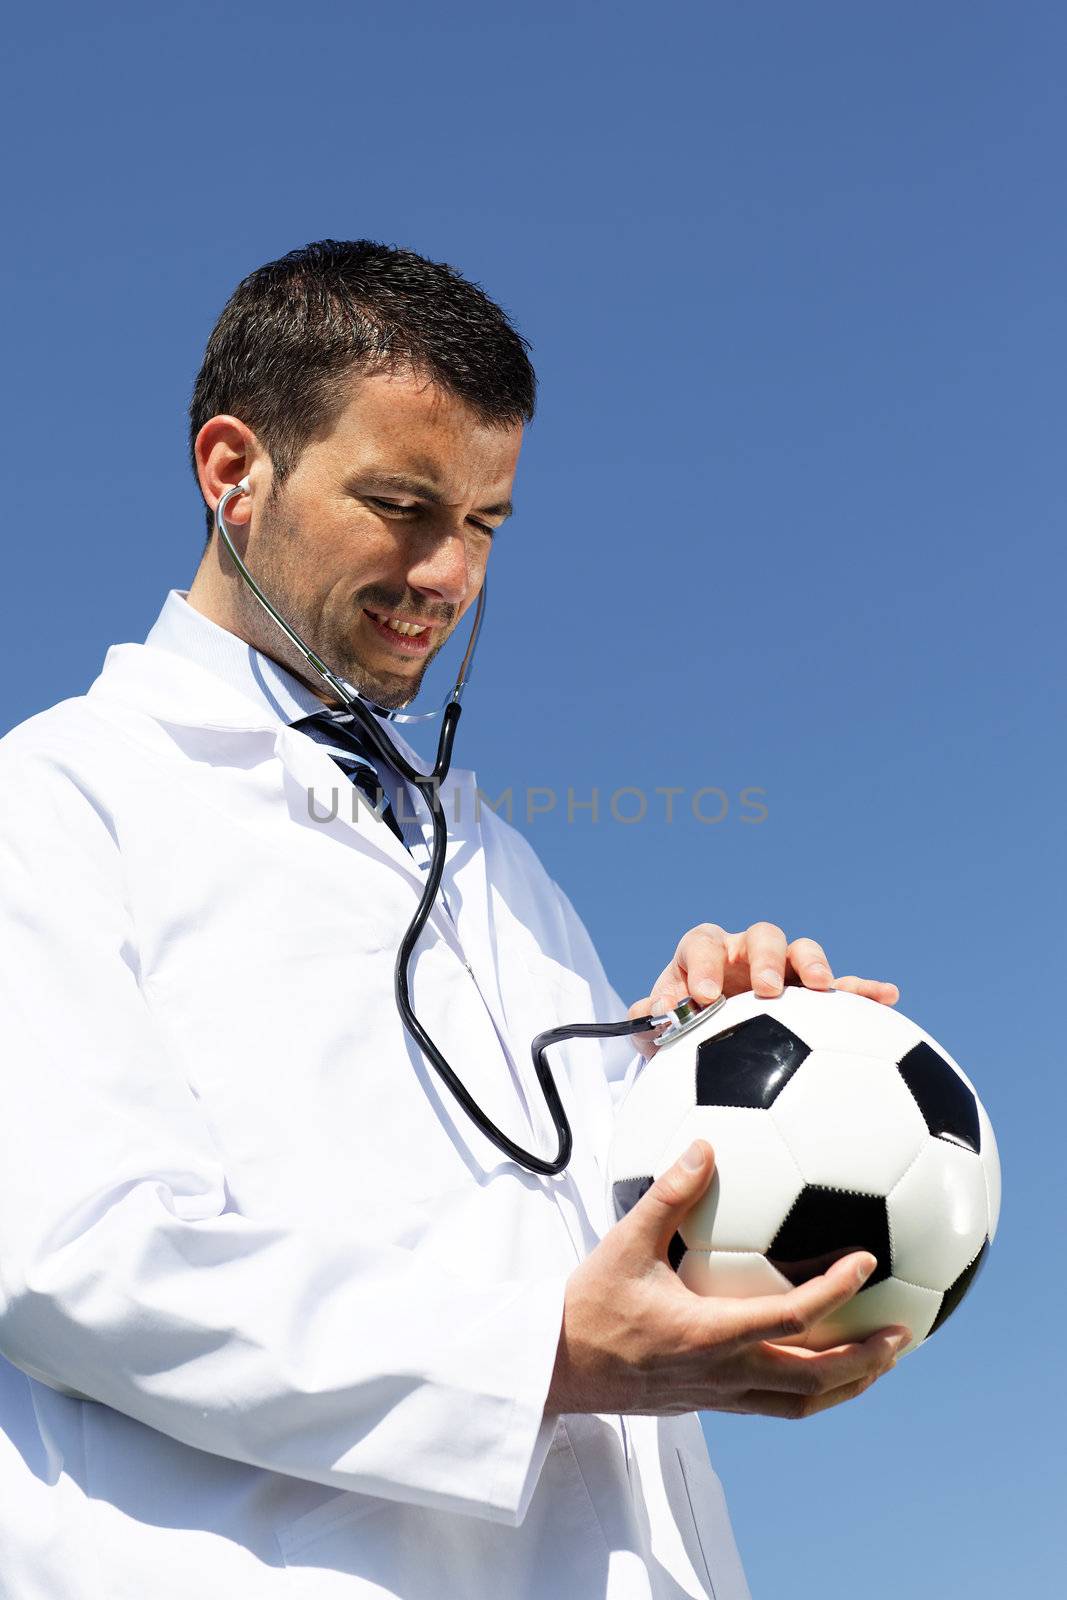 football doctor by vwalakte